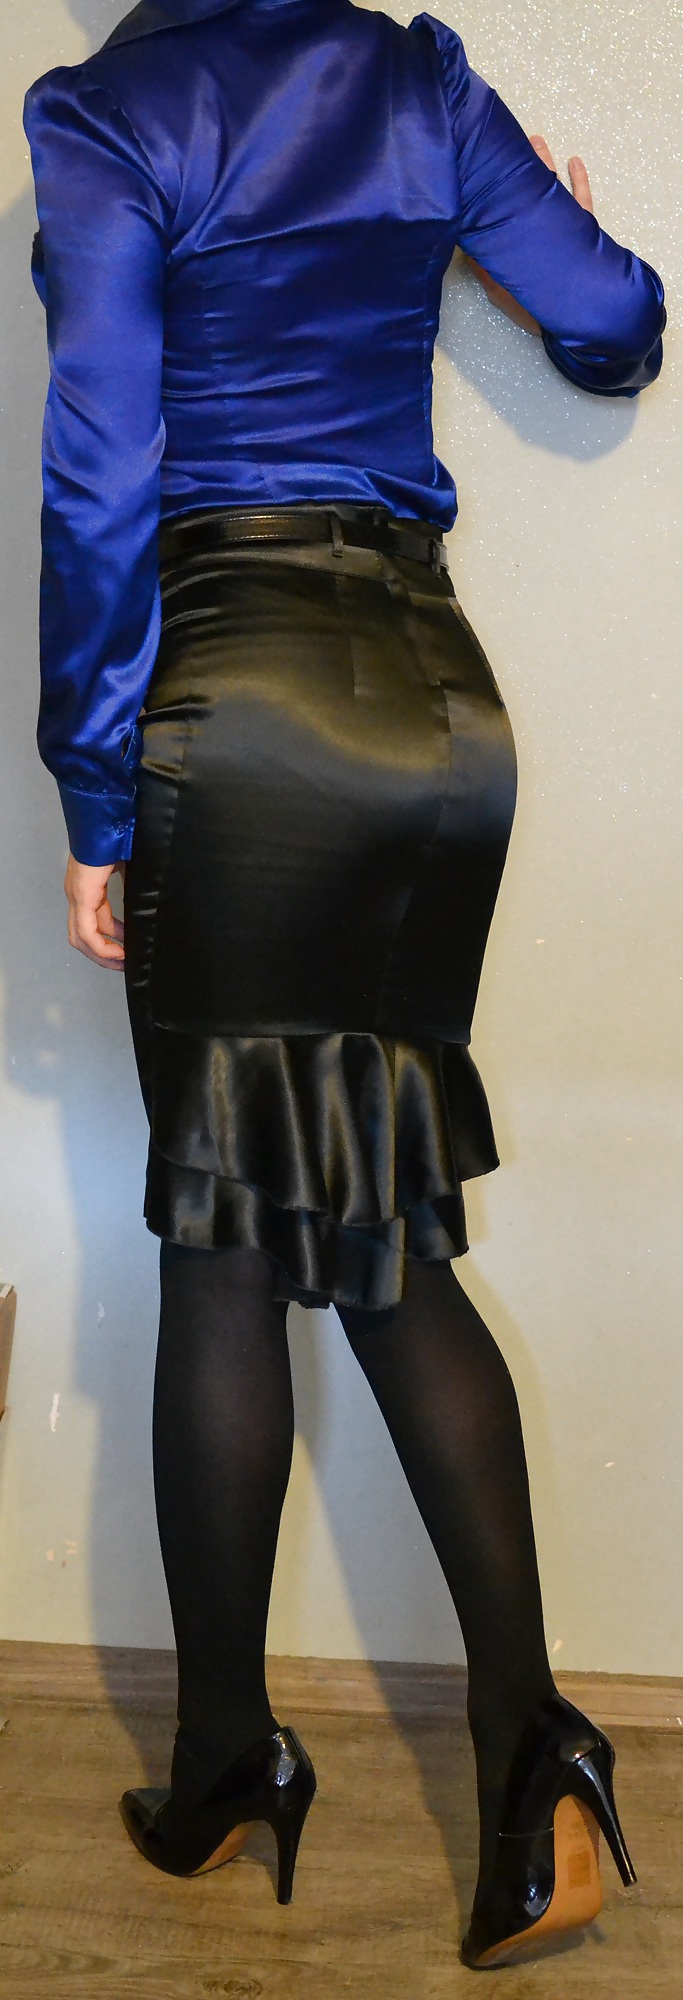 Sex Gallery dressed for work in my silky skirt, black tights and heels